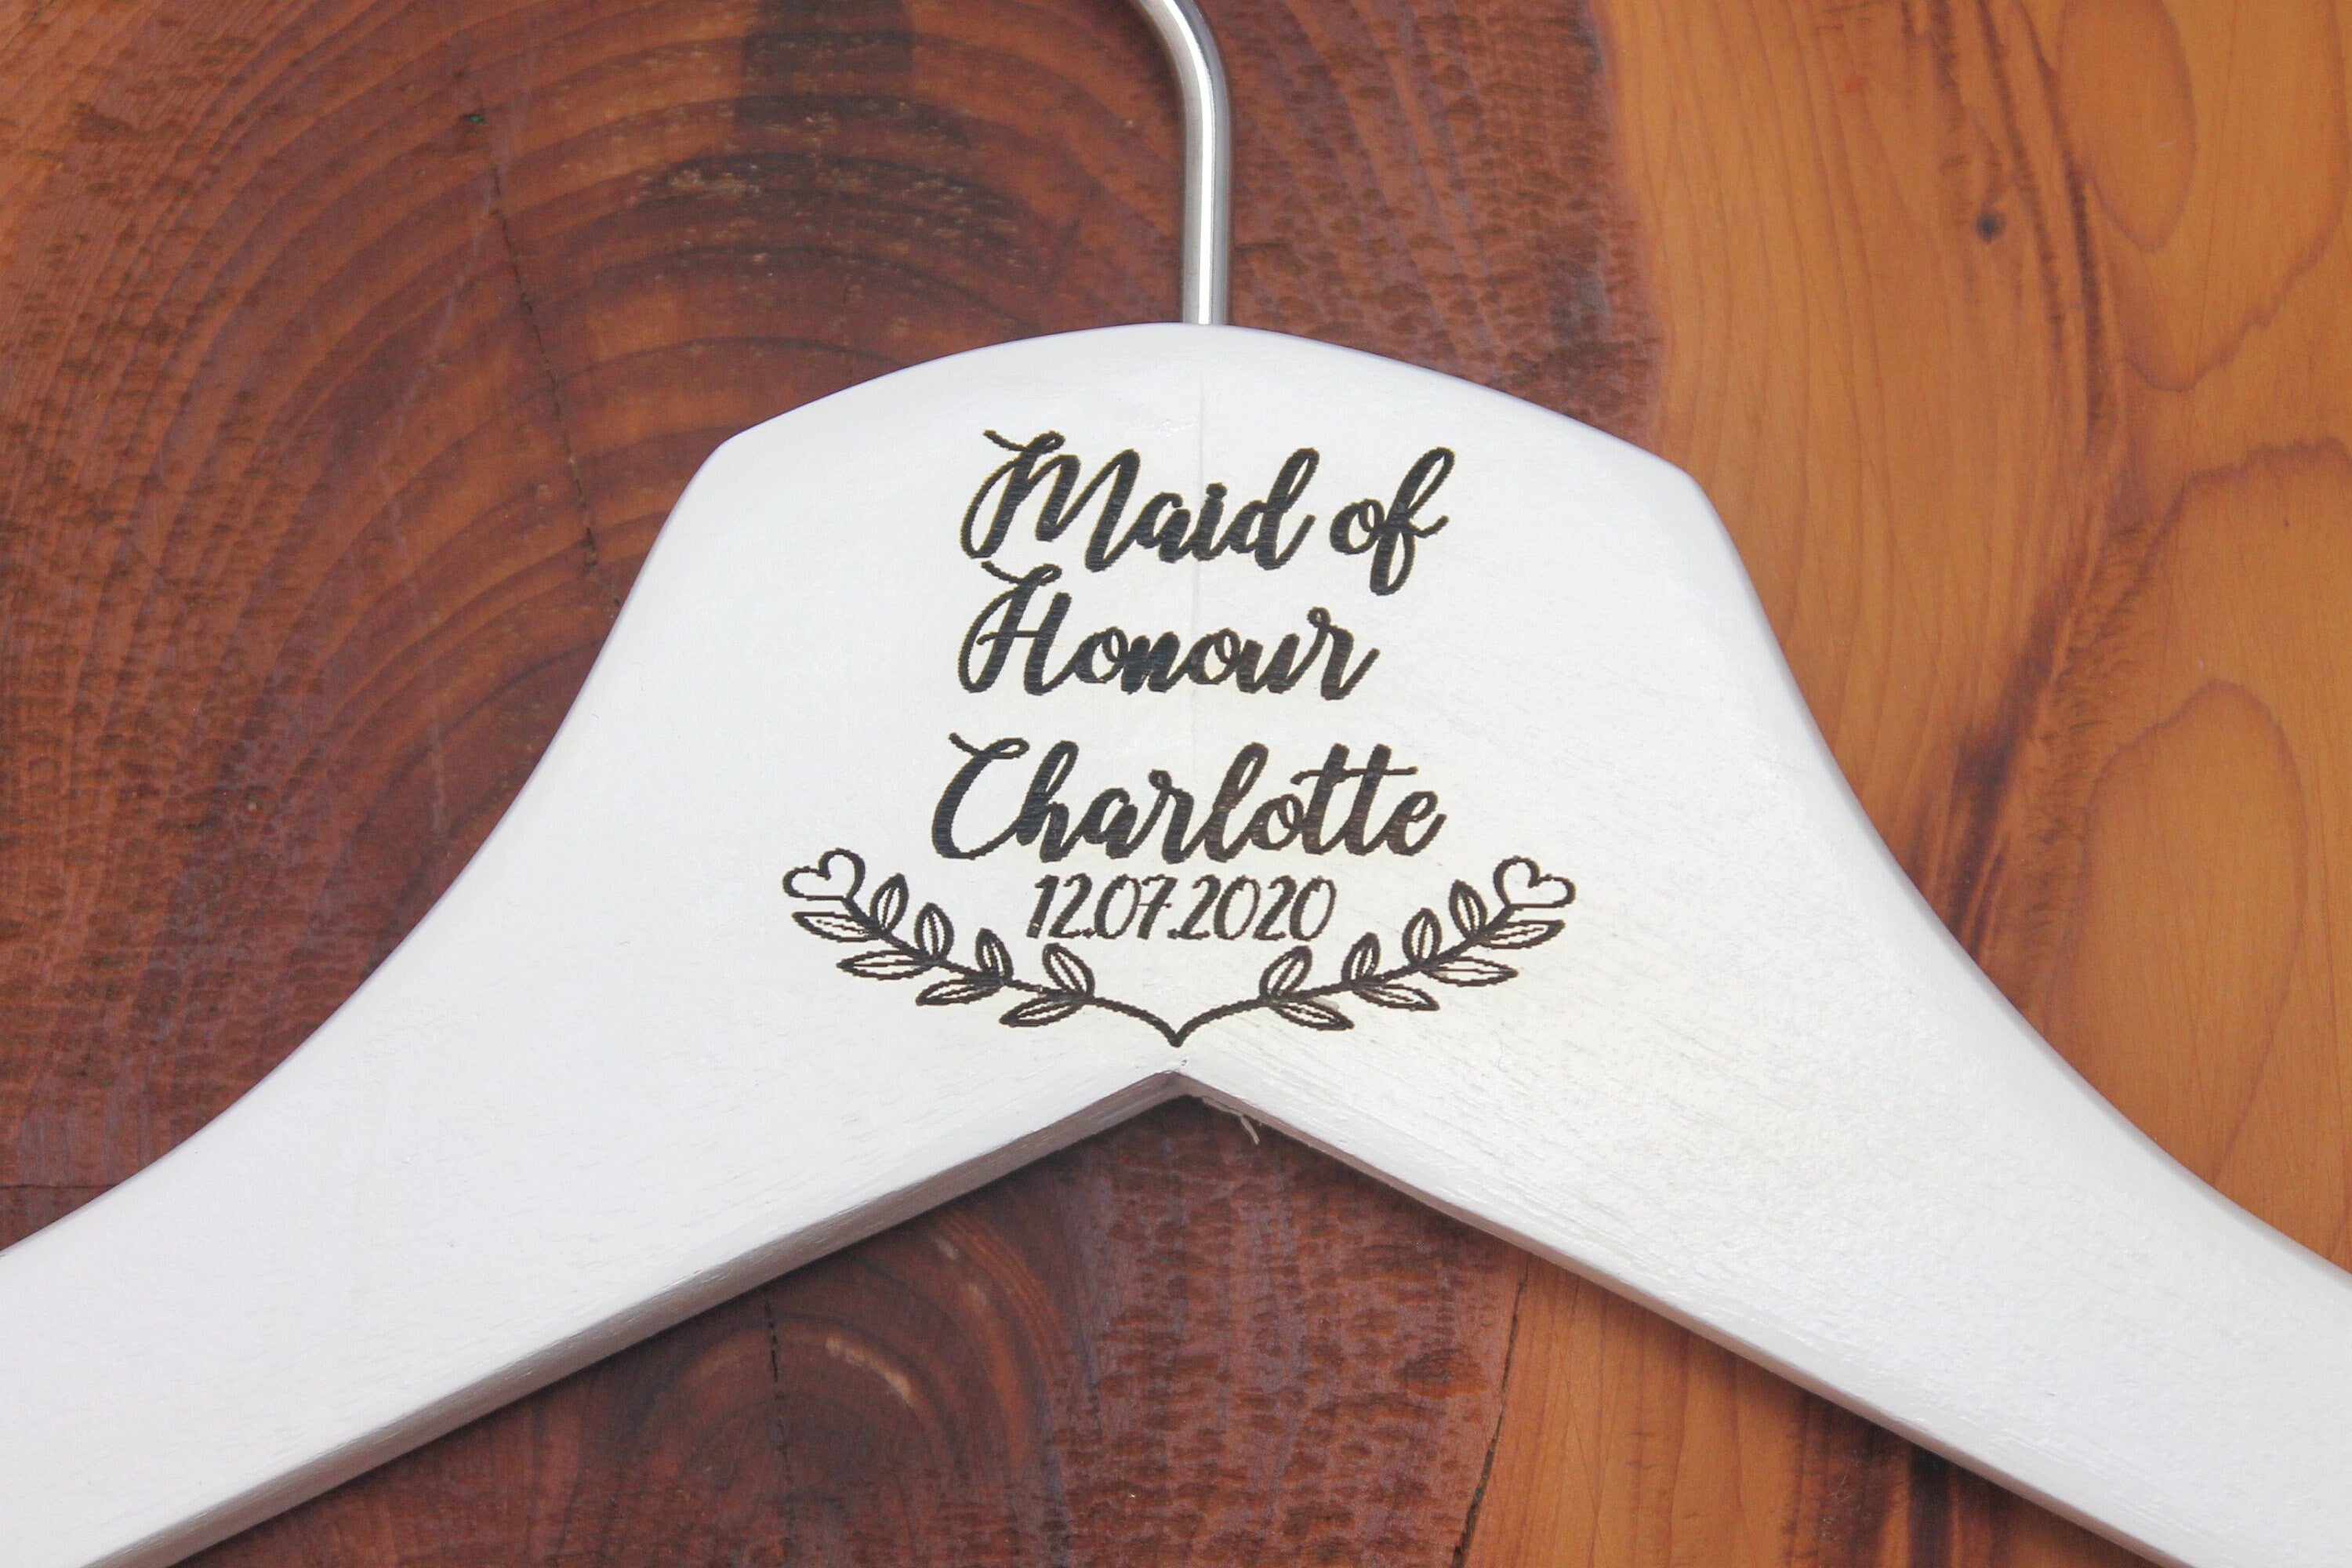 Personalised Bridal Wedding Hanger in Wood or White - Hanger Engraved Wedding Gift Bride, Bridesmaids and more - Floral Banner